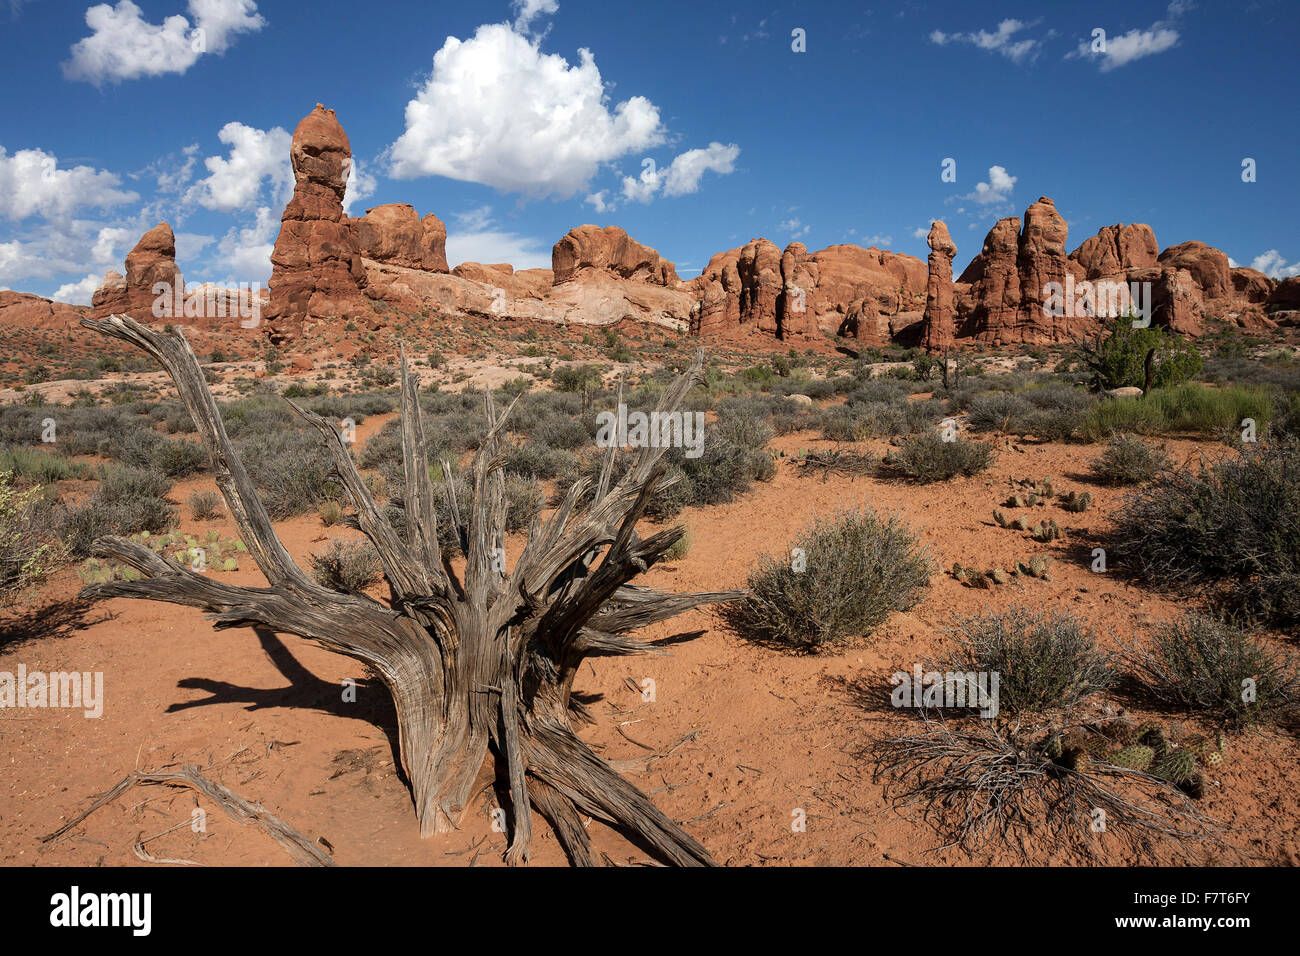 Rock pinnacles, dead bristlecone pine (Pinus aristata) in front, Arches National Park, Utah, USA Stock Photo